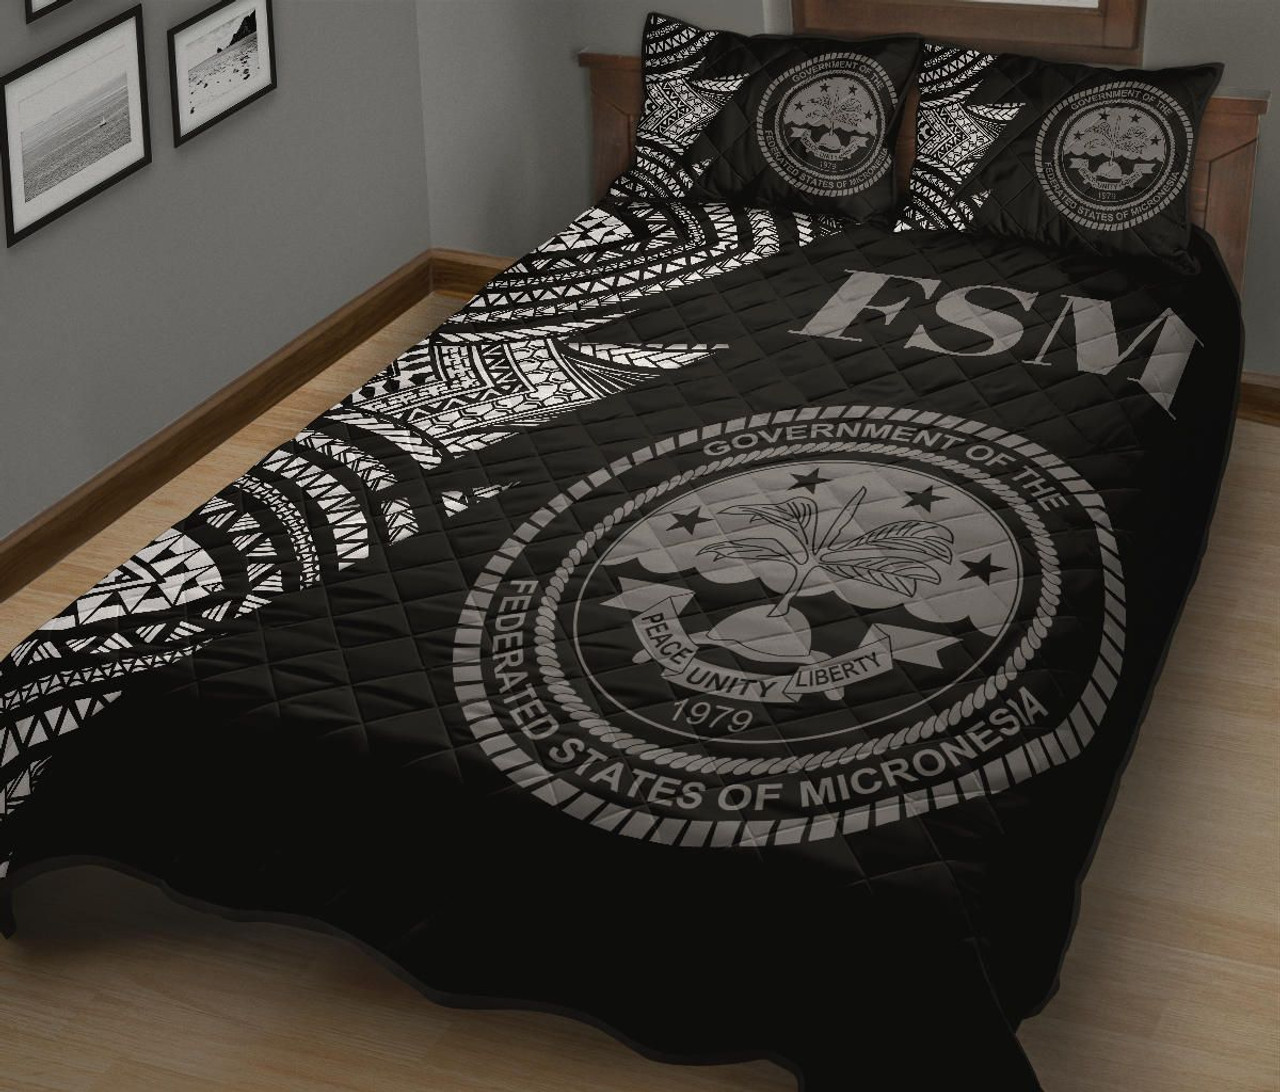 Federated States of Micronesia Quilt Bed Set - Federated States of Micronesia Seal Flash Version 3